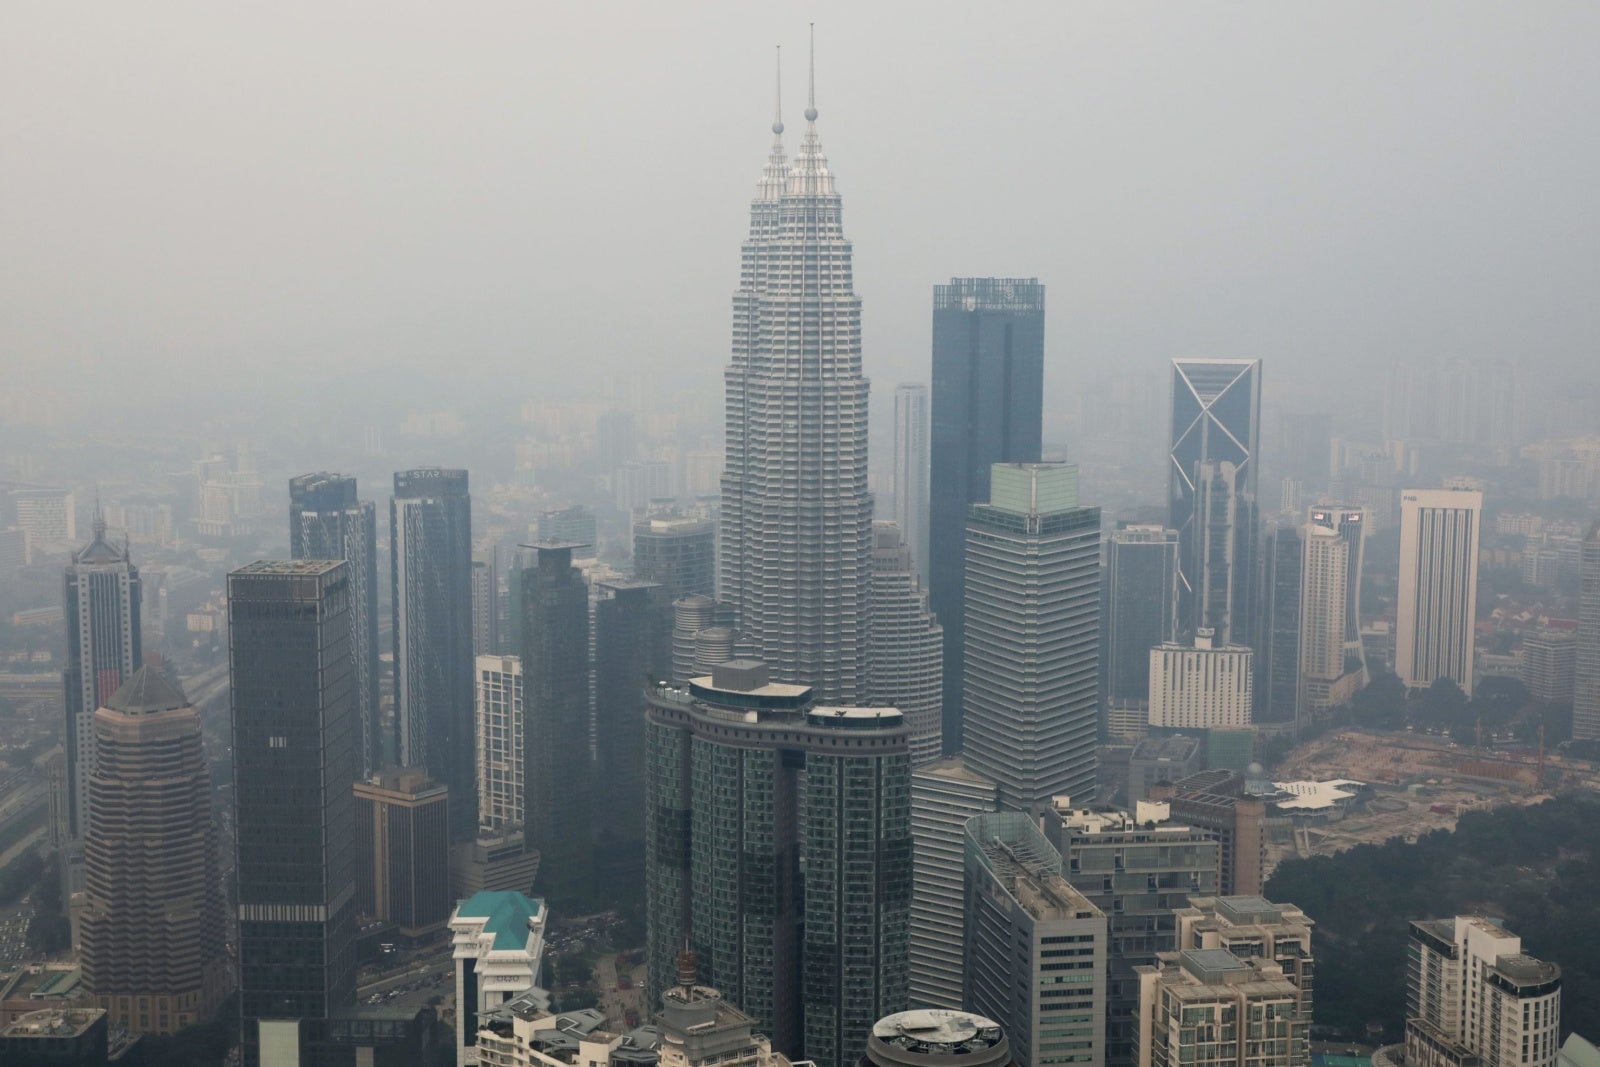 Cloud Seeding is Planned to be Carried Out on 16 Sep Morning to Improve the Haze - WORLD OF BUZZ 1